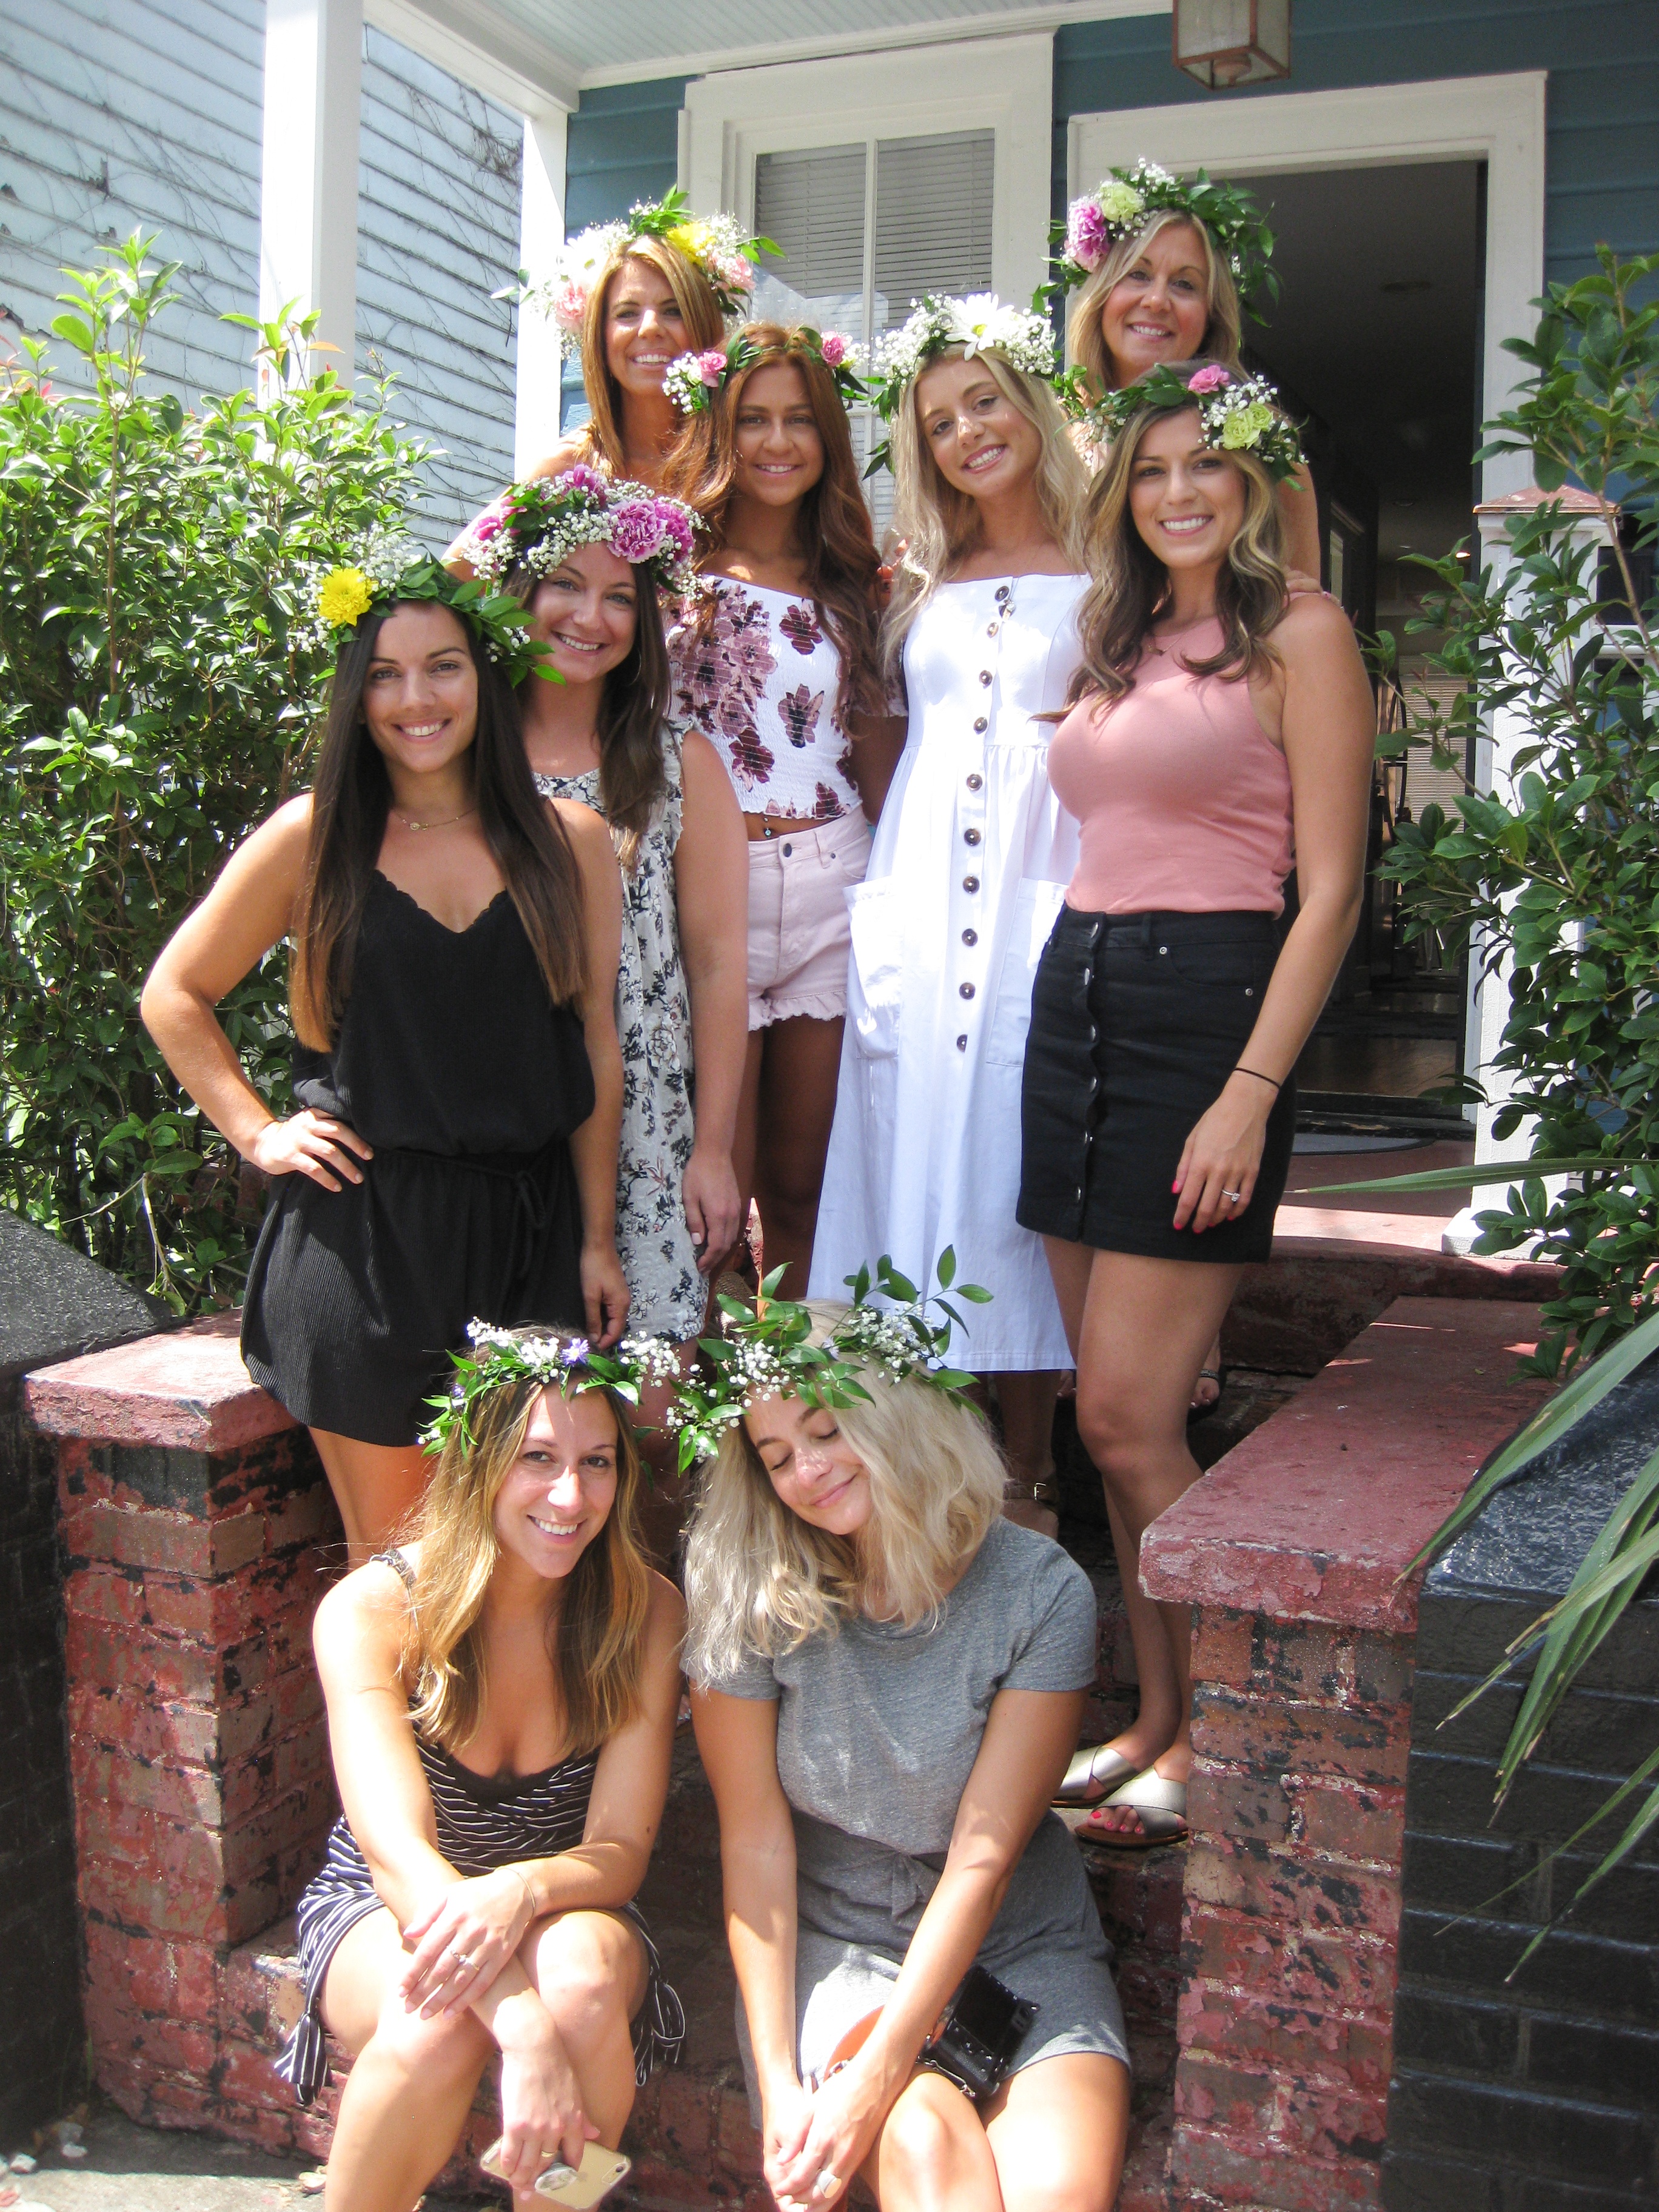 Molly B You saved to Fetes de Fleurs Charleston // DIY Floral Parties #CHARLESTONBACHELORETTE FUN! Create your own DIY floral crown!